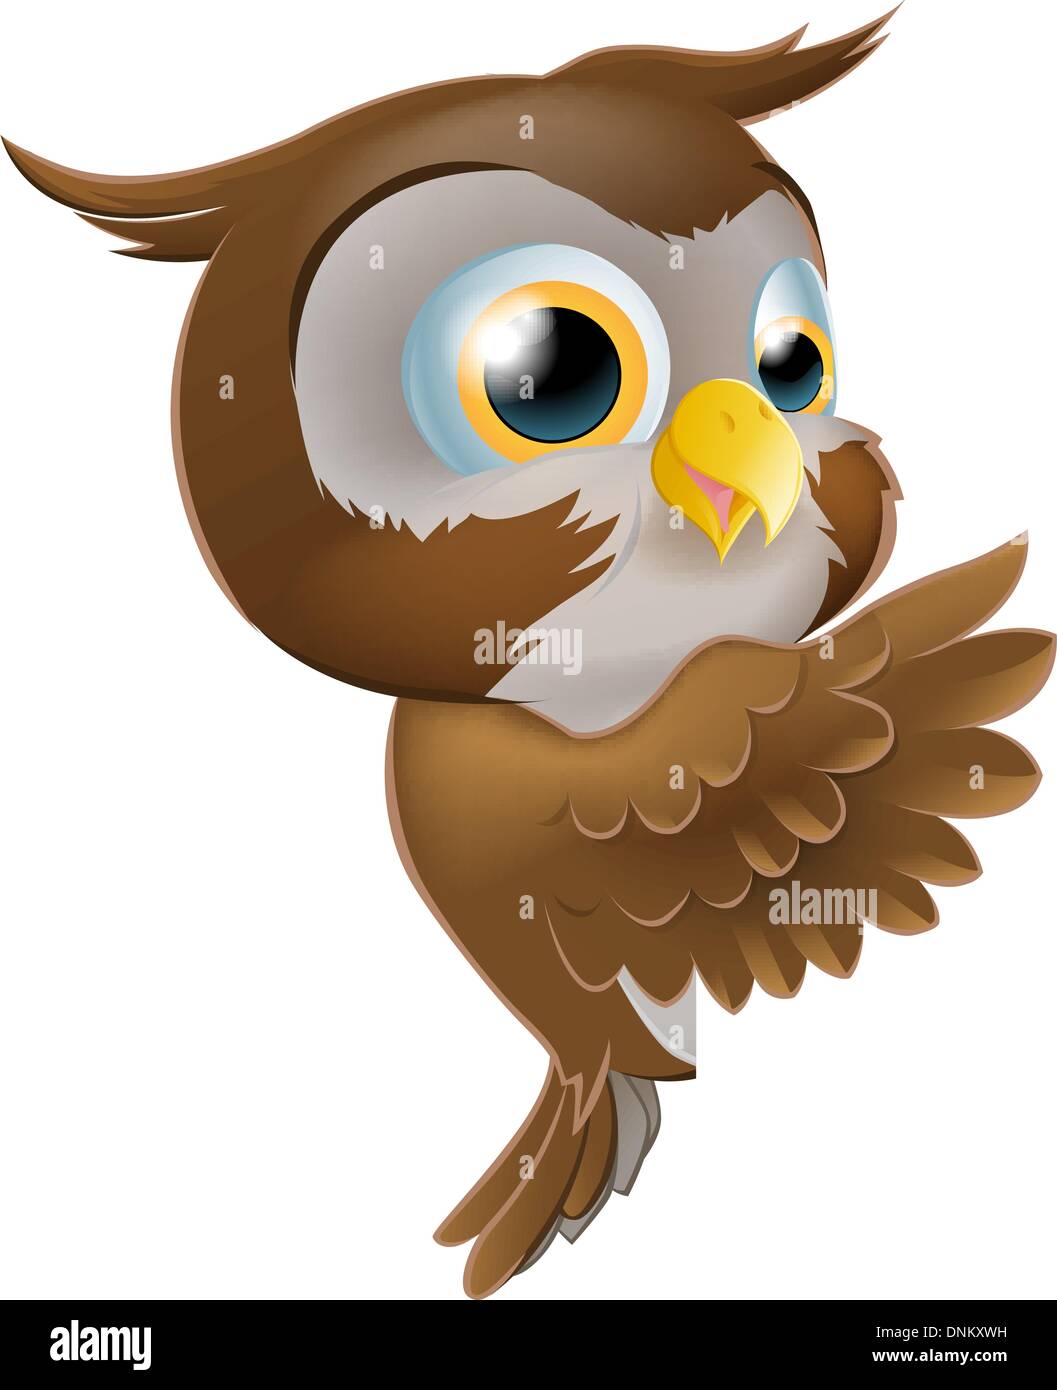 An illustration of a cute cartoon owl character peeking round from behind a sign and pointing or showing what it says Stock Vector